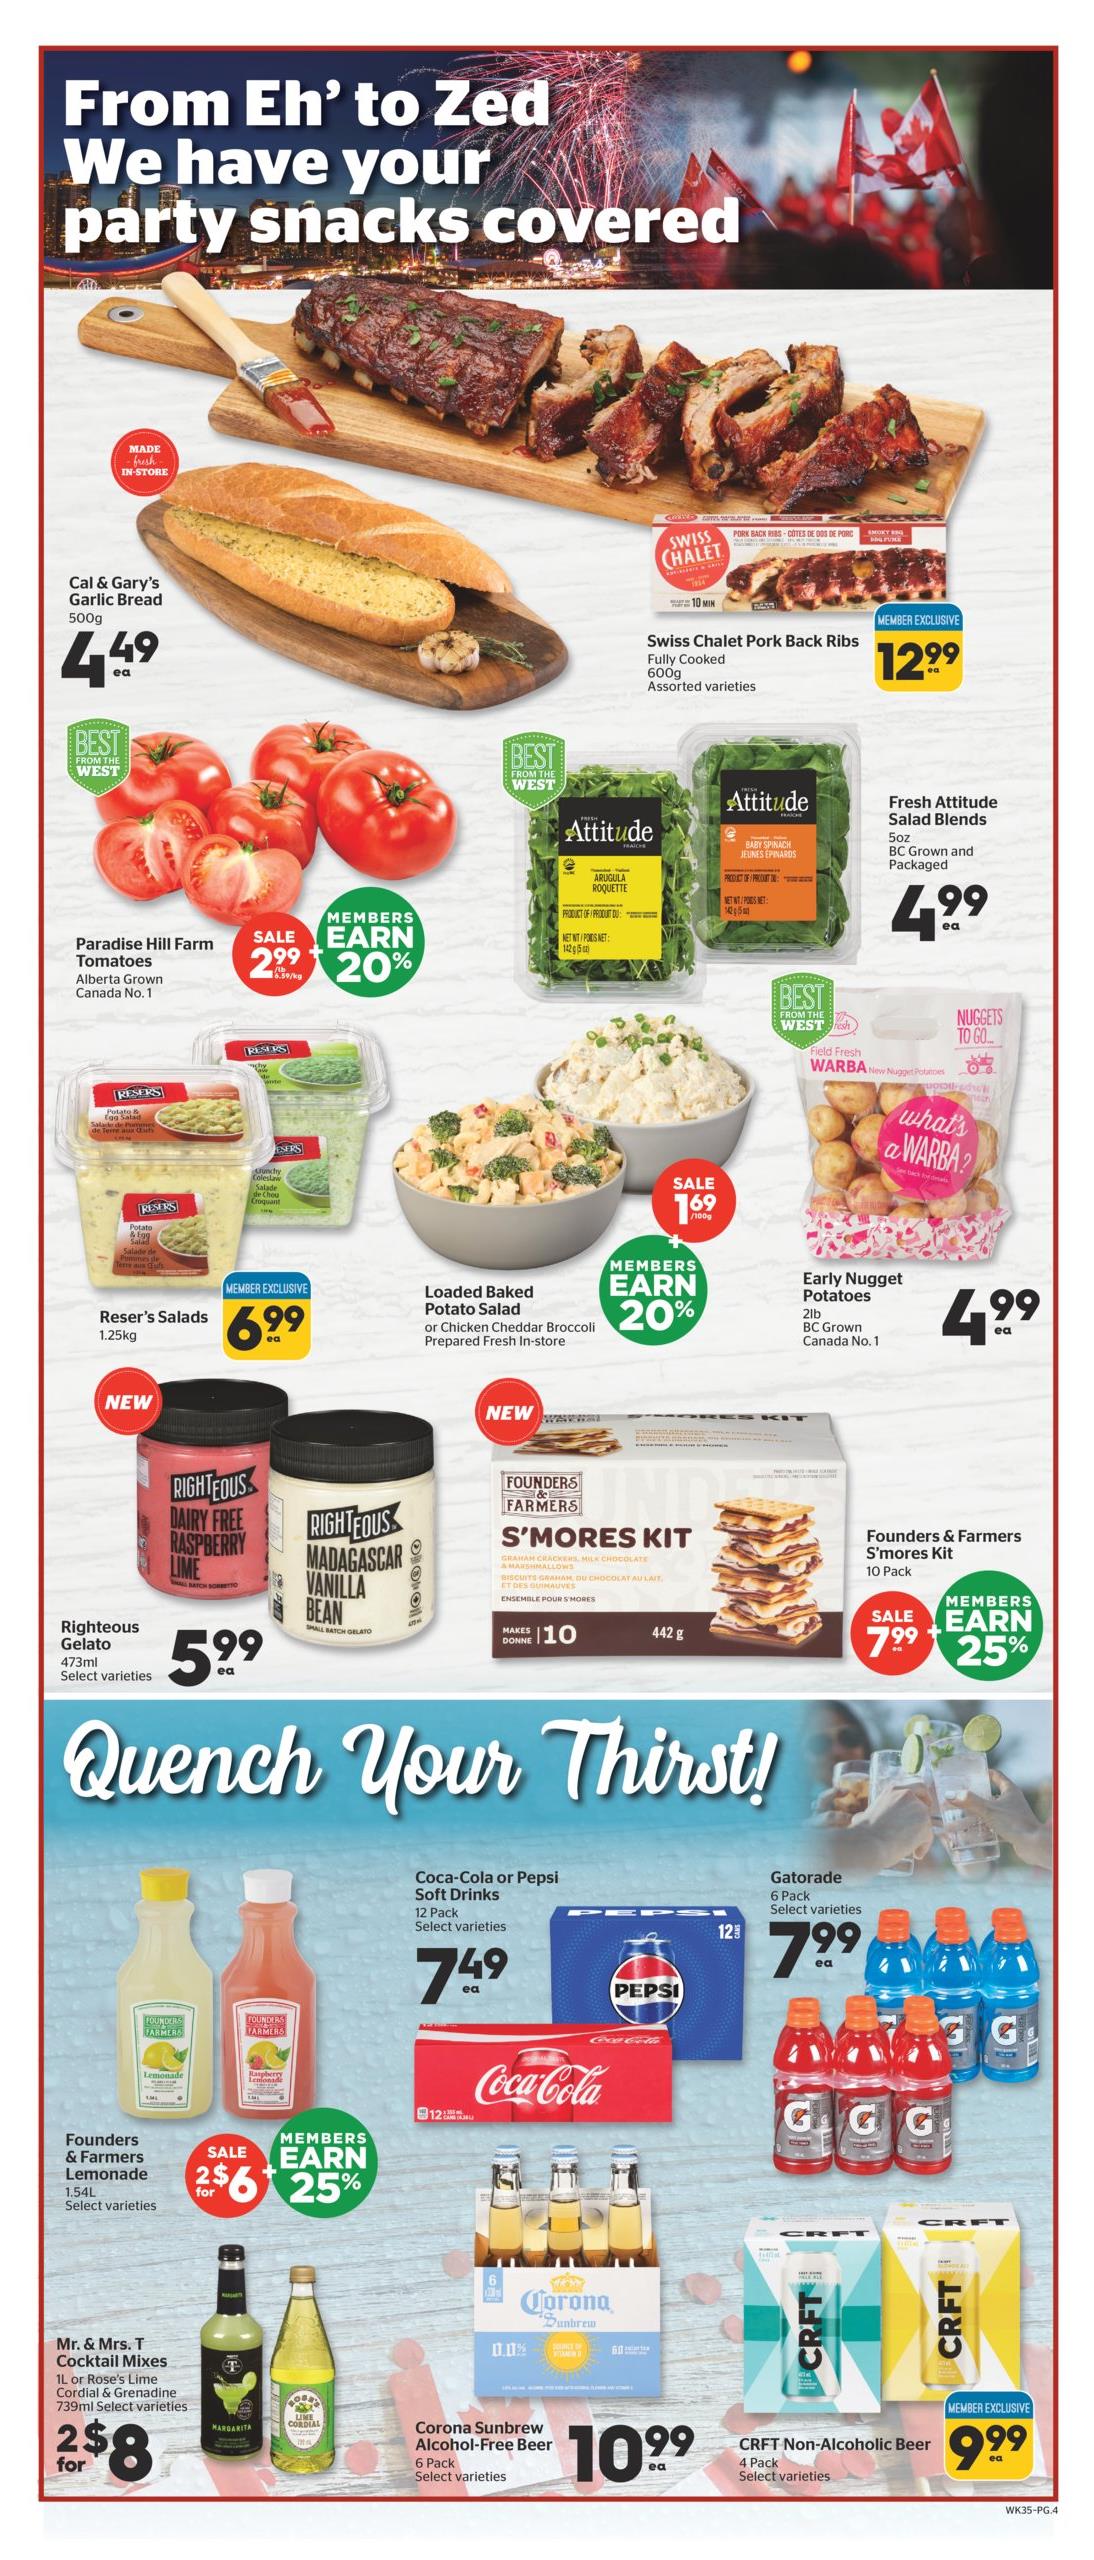 Calgary Co-op - Weekly Flyer Specials - Page 4